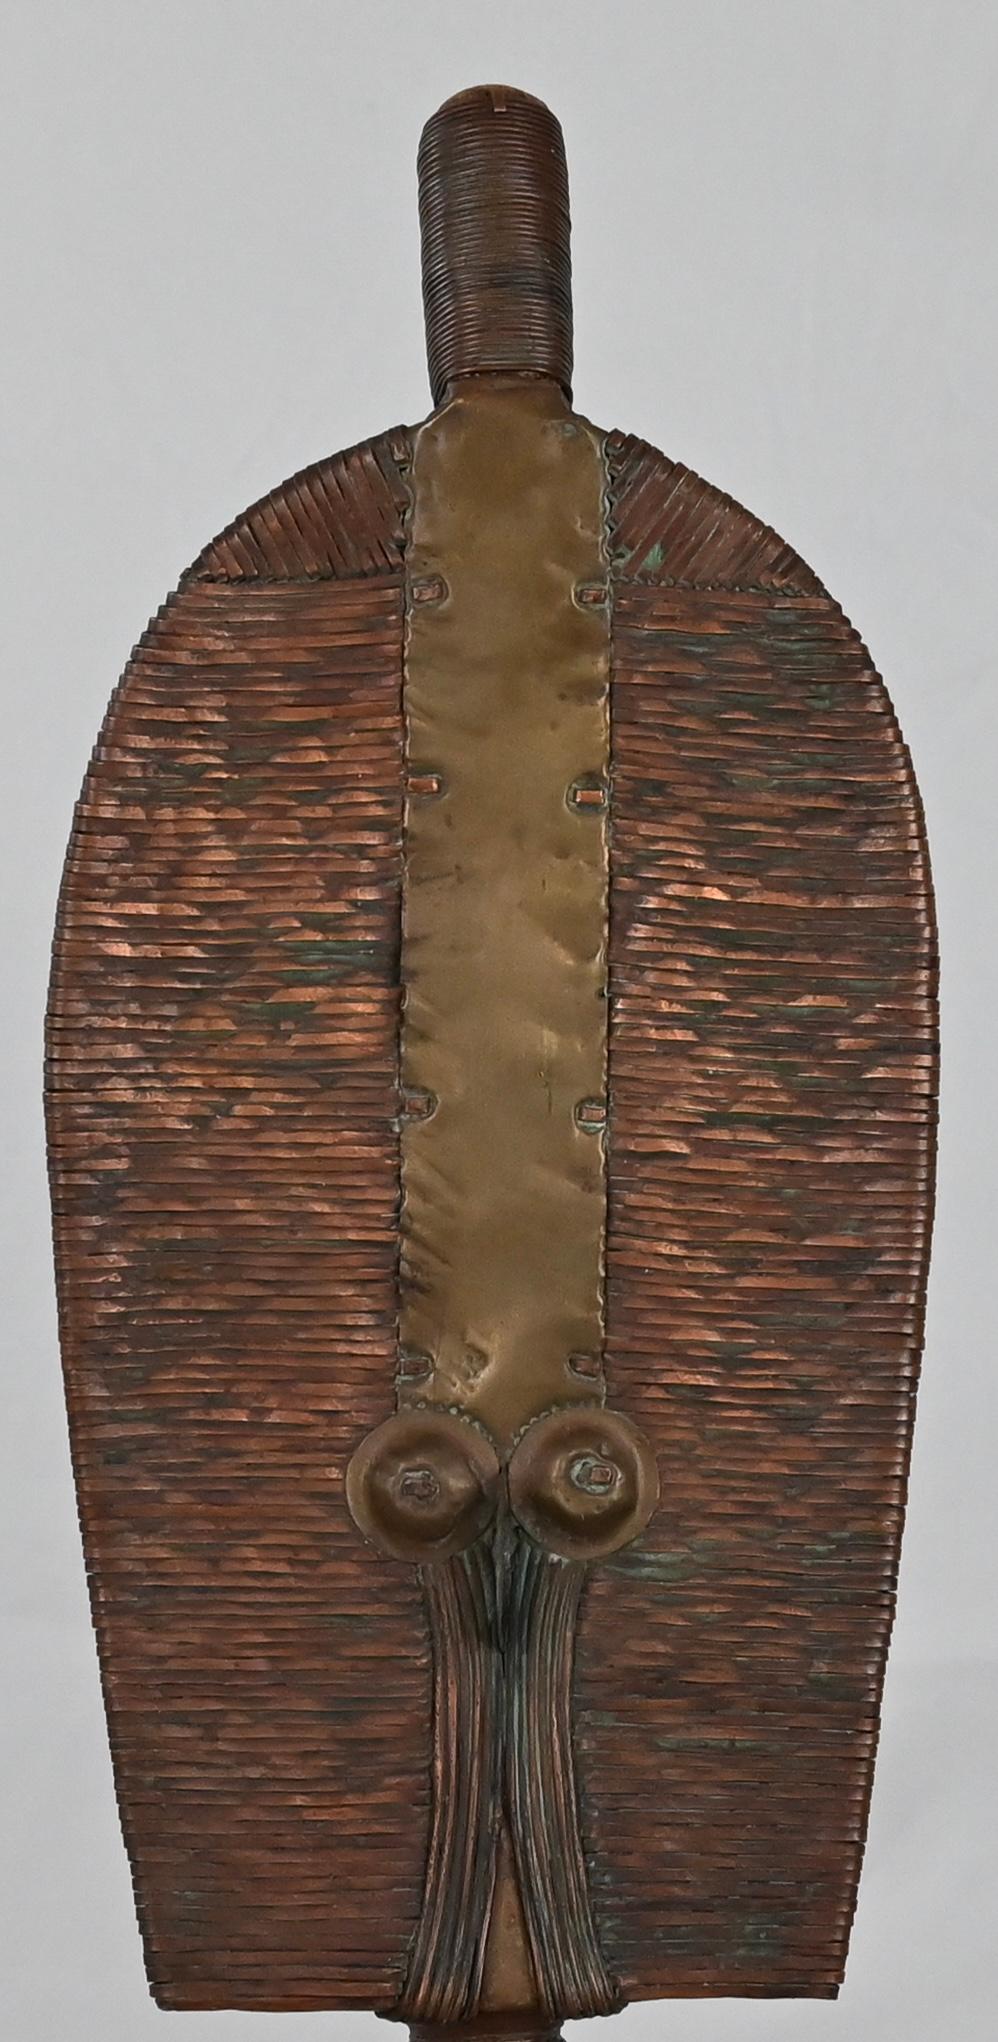 A fantastically hand-crafted piece by the Kota (or Bakota) tribe who are located in the northeastern region of Gabon. This figure, which is a Mahongwe reliquary figure as exhibited with its truncated almond-shaped face, is made of wound copper,